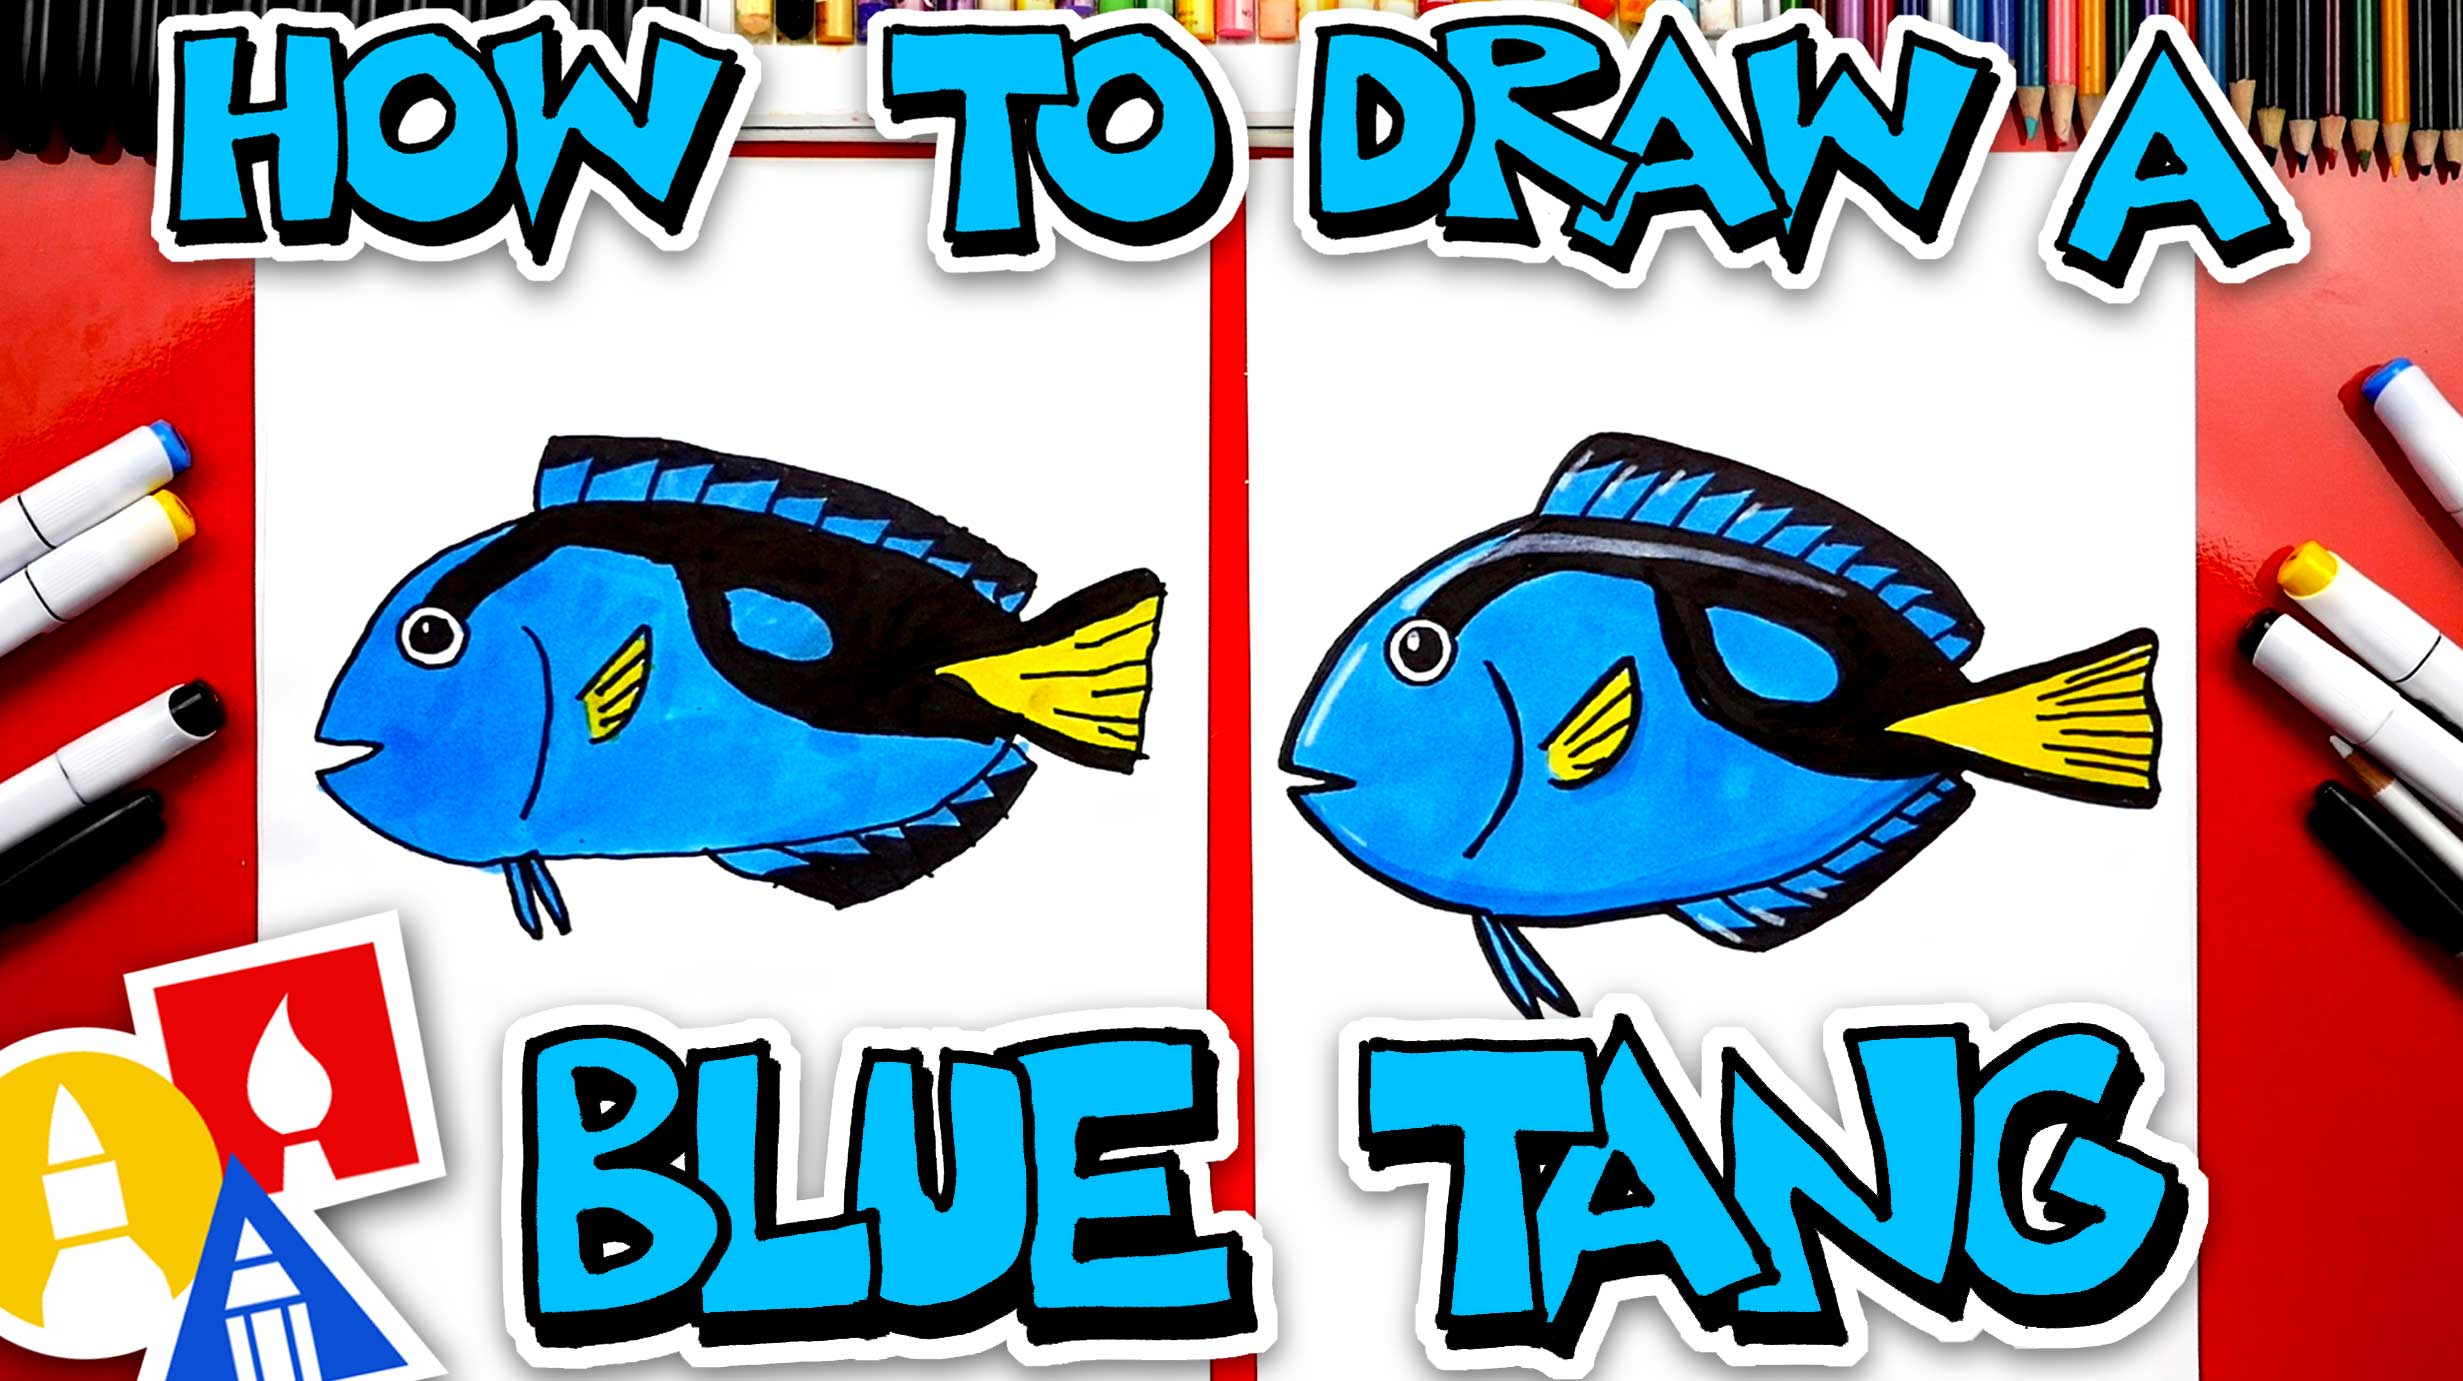 How To Draw A Blue Tang Art For Kids Hub